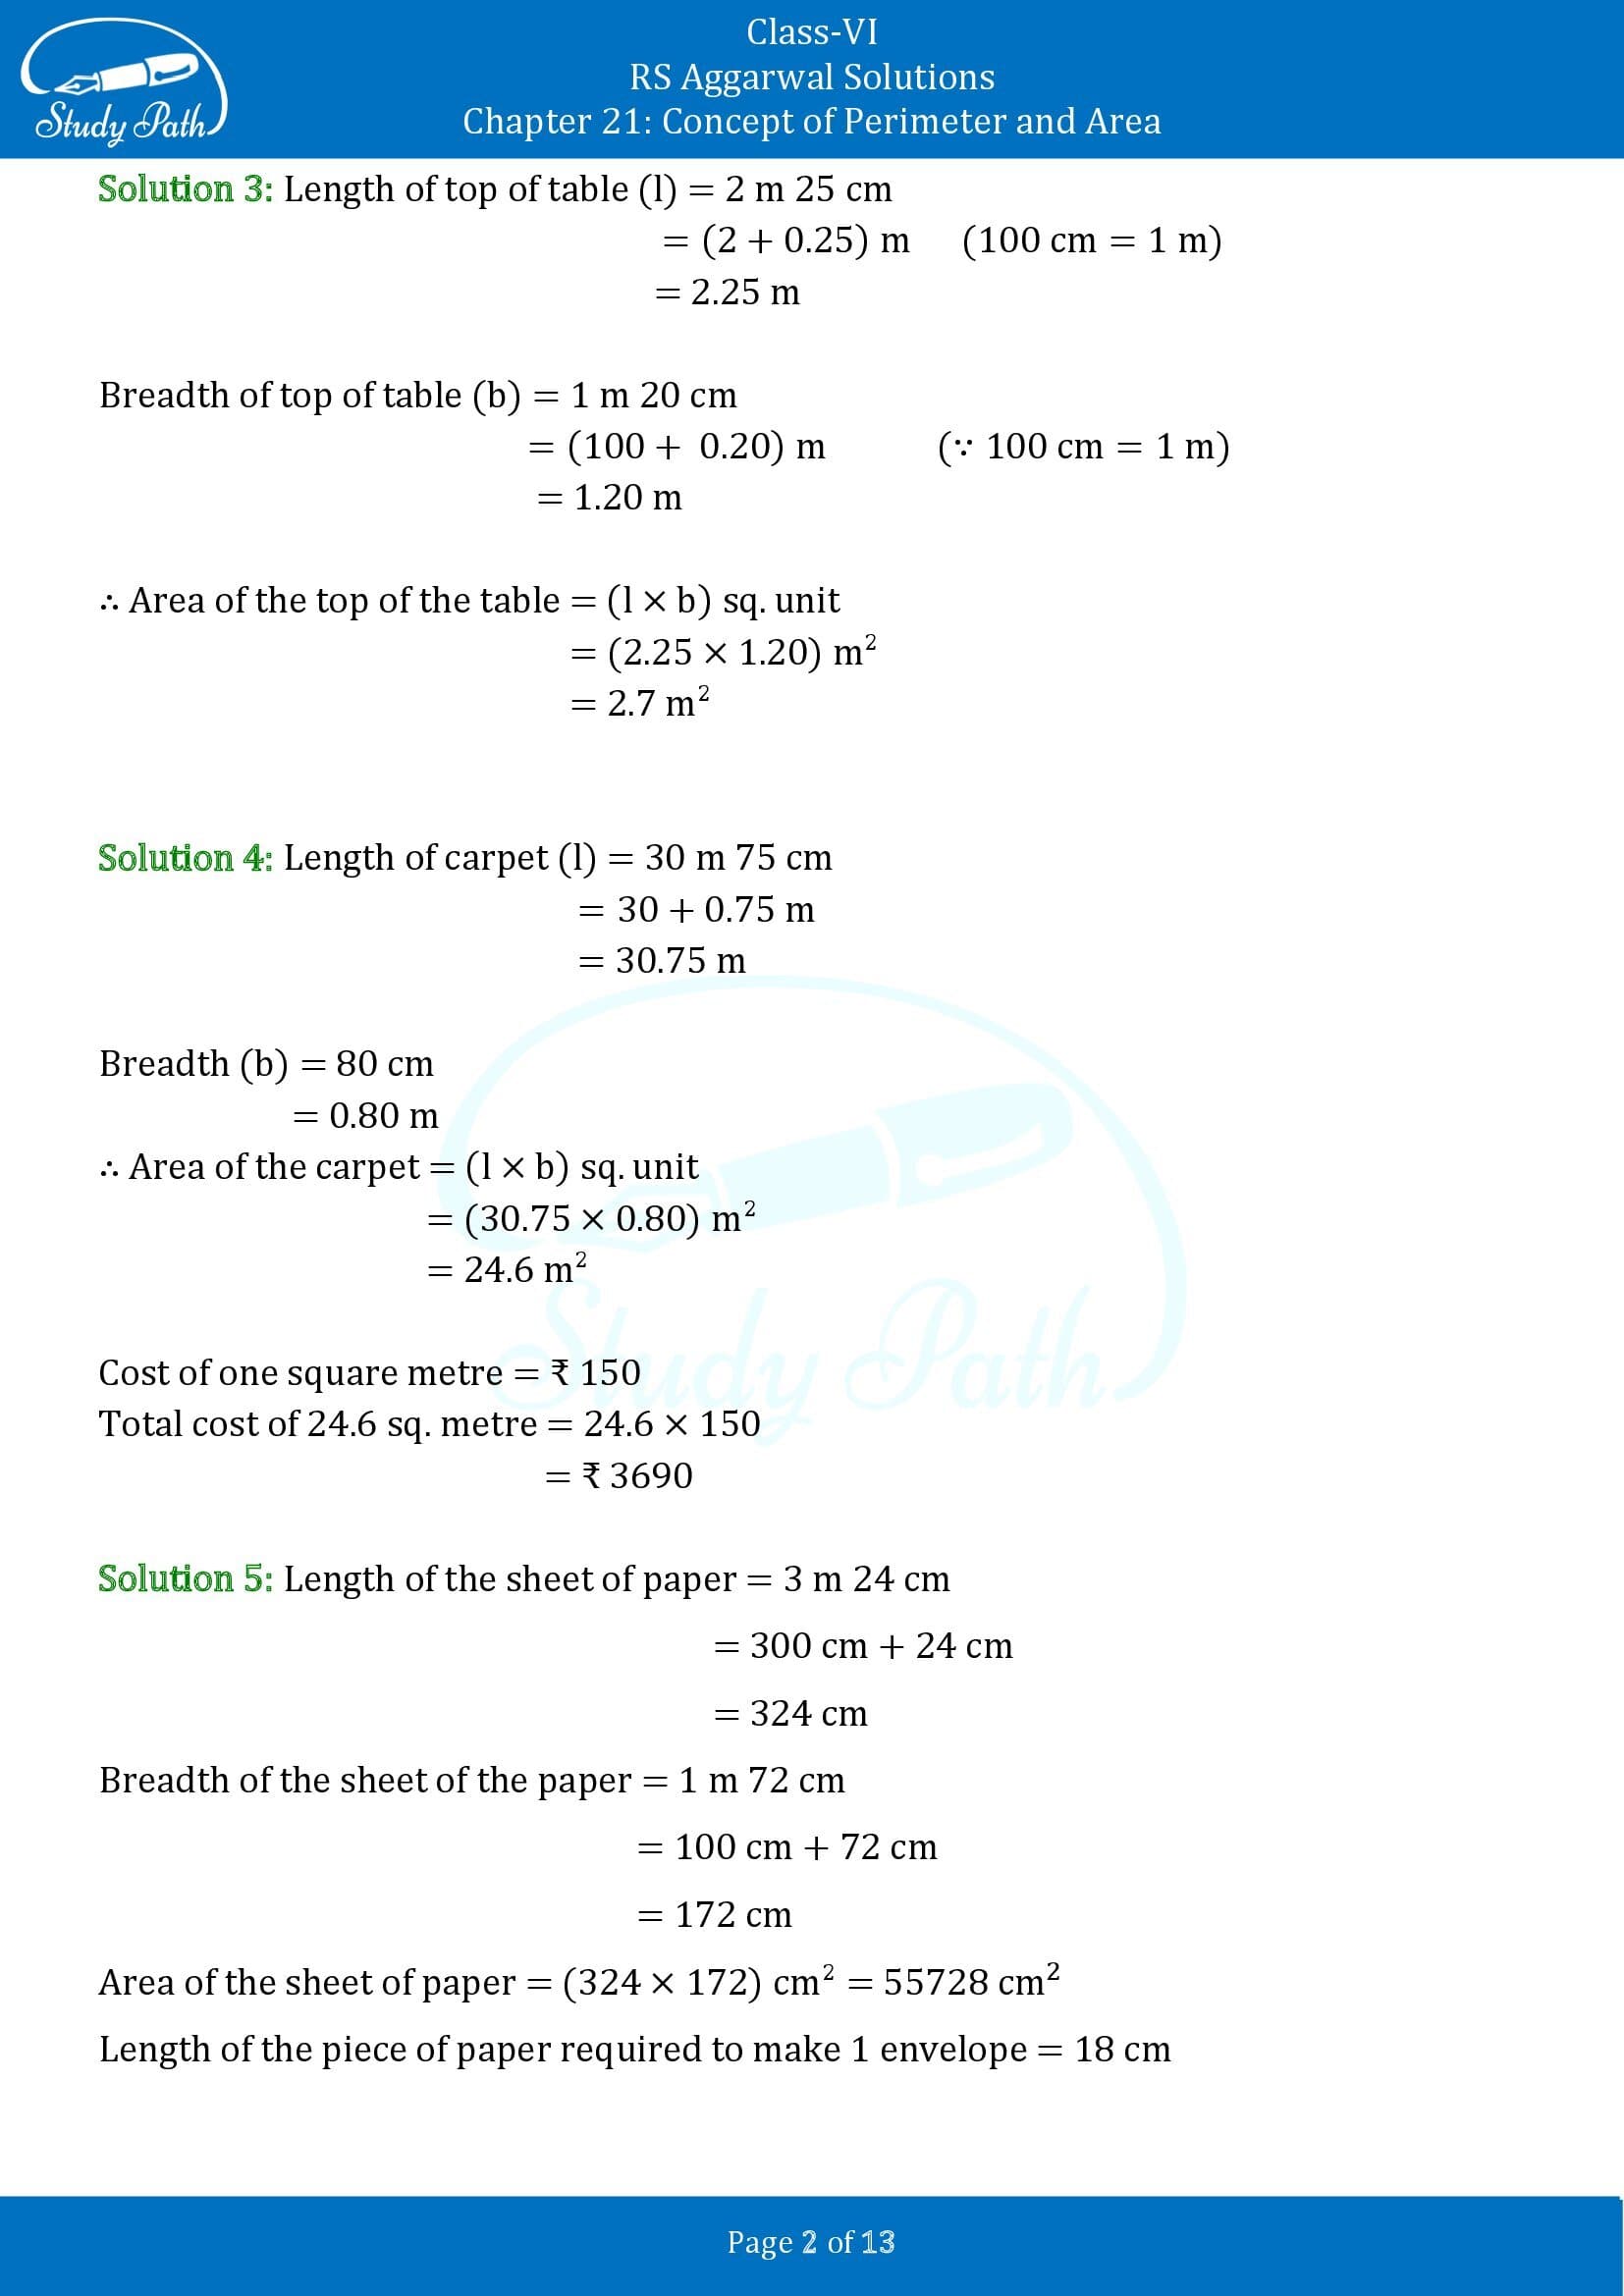 RS Aggarwal Solutions Class 6 Chapter 21 Concept of Perimeter and Area Exercise 21D 00002